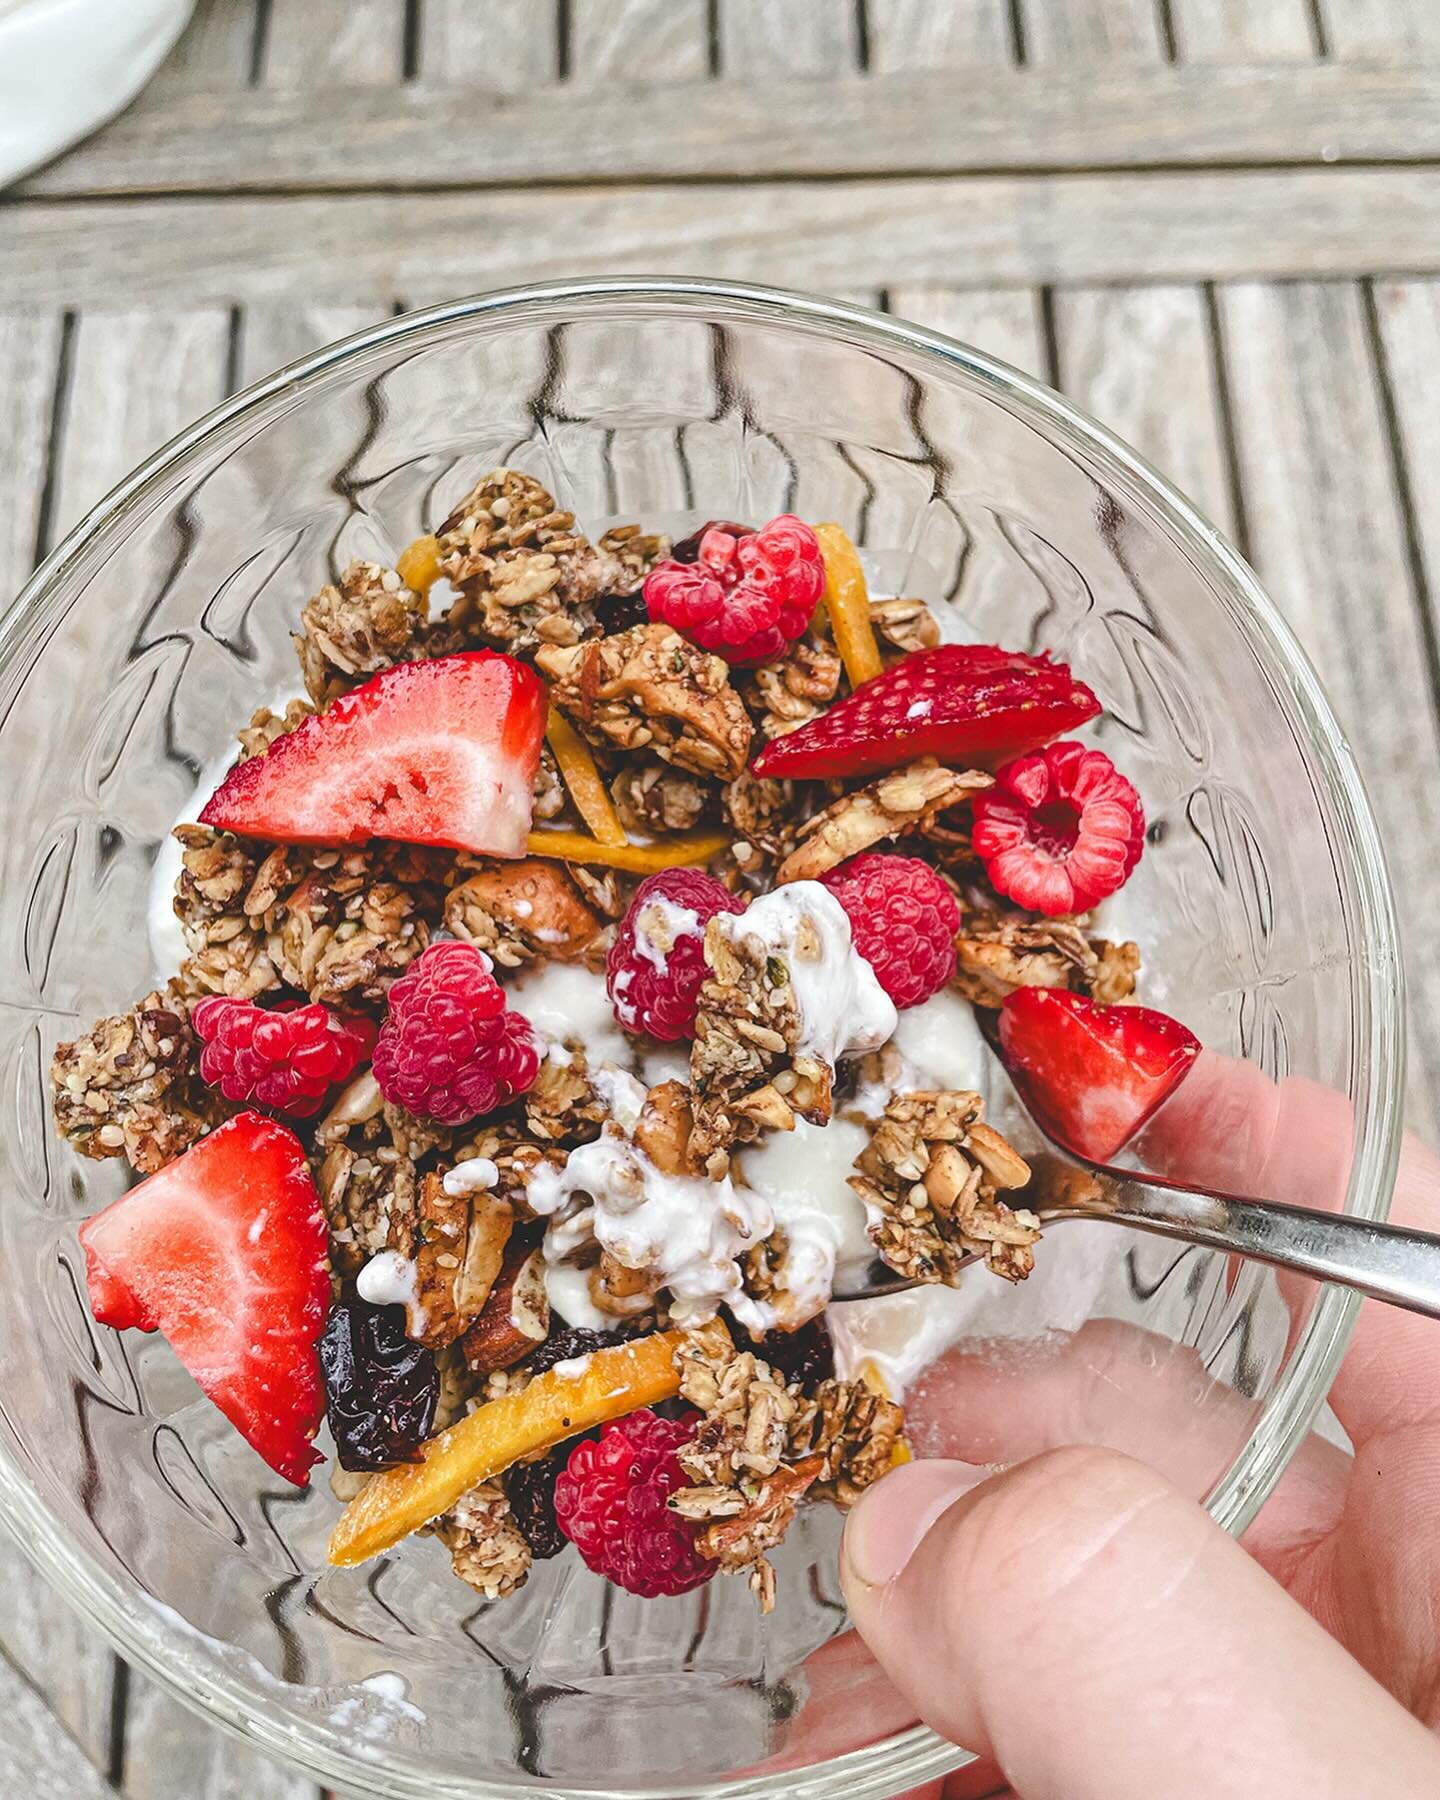 Today on Substack I share my go-to homemade granola recipe from the blog. I&rsquo;ve been making this protein-packed snack for years and think I&rsquo;ve perfected it. I love easy, filling snacks I can munch on all day.

Crispy, crunchy oat clusters 